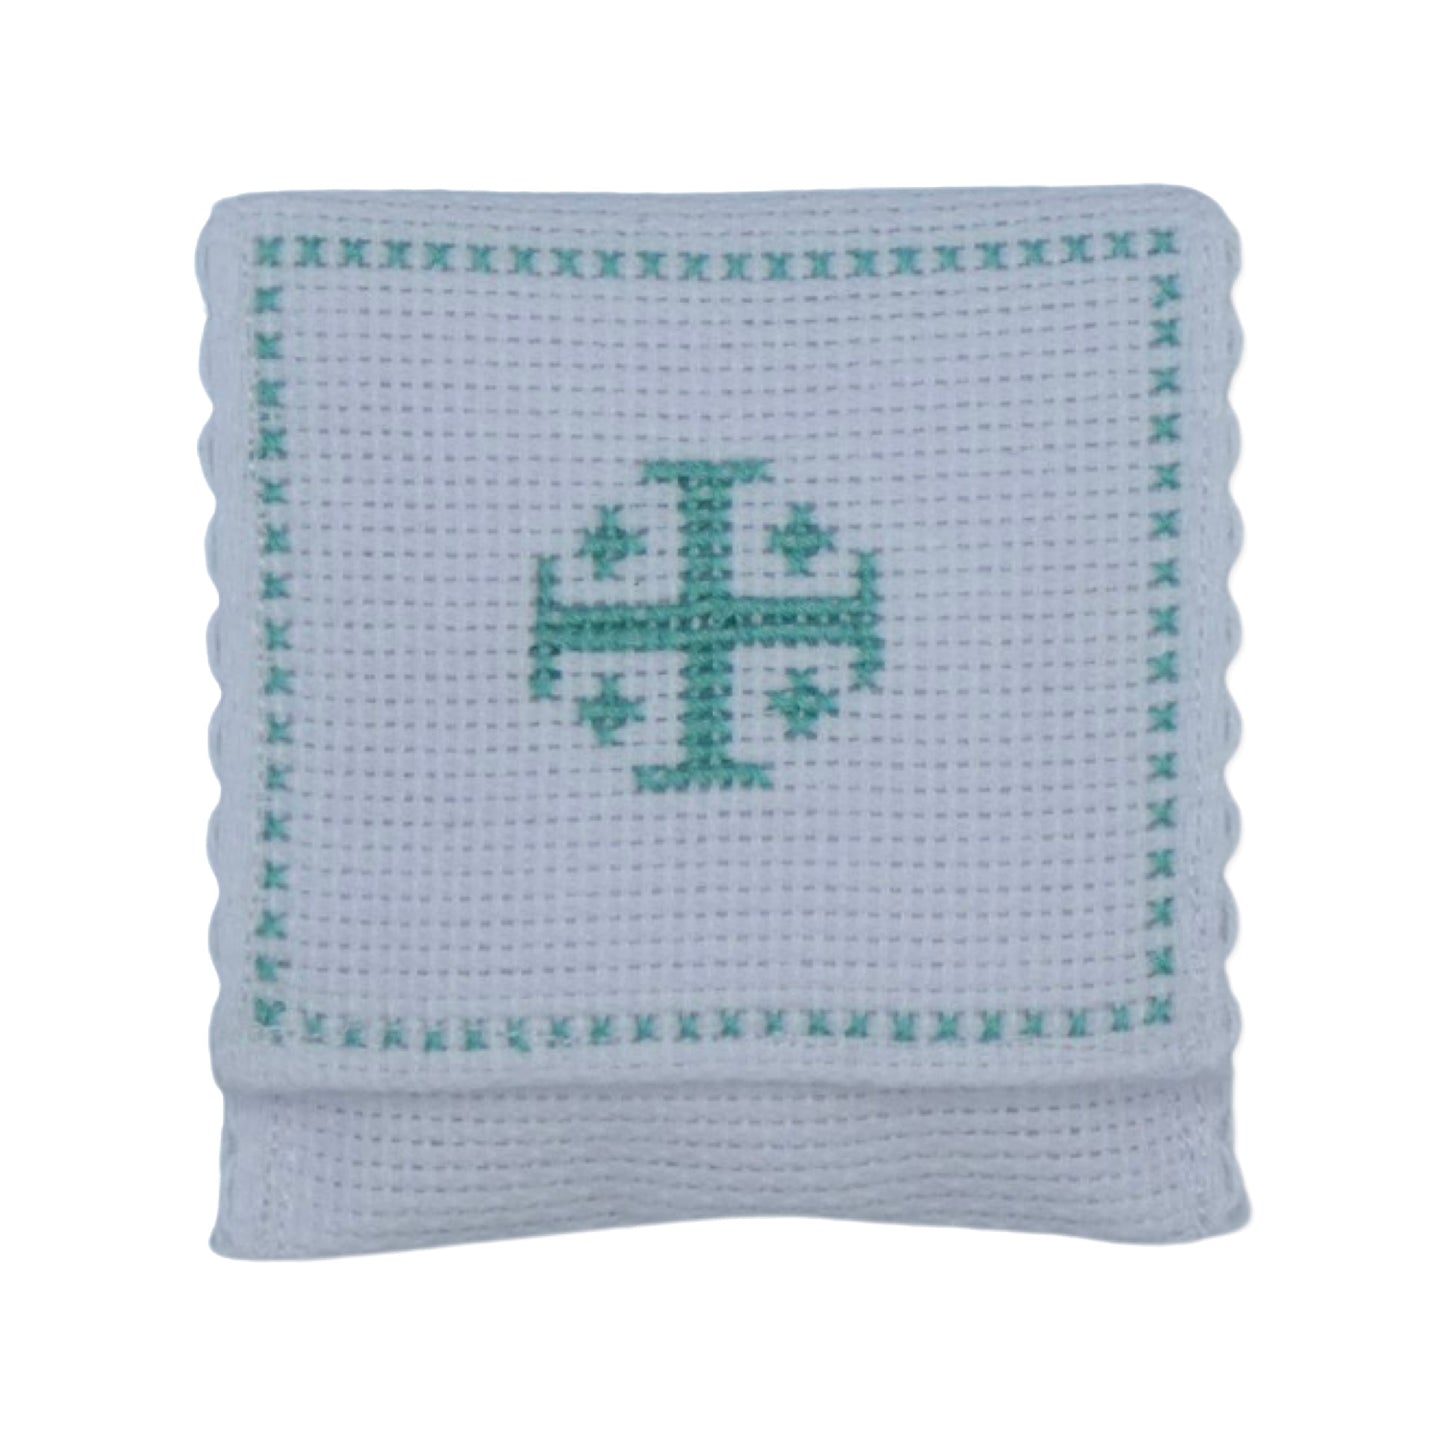 Embroidered Jerusalem Cross Pouch of Assorted Colors